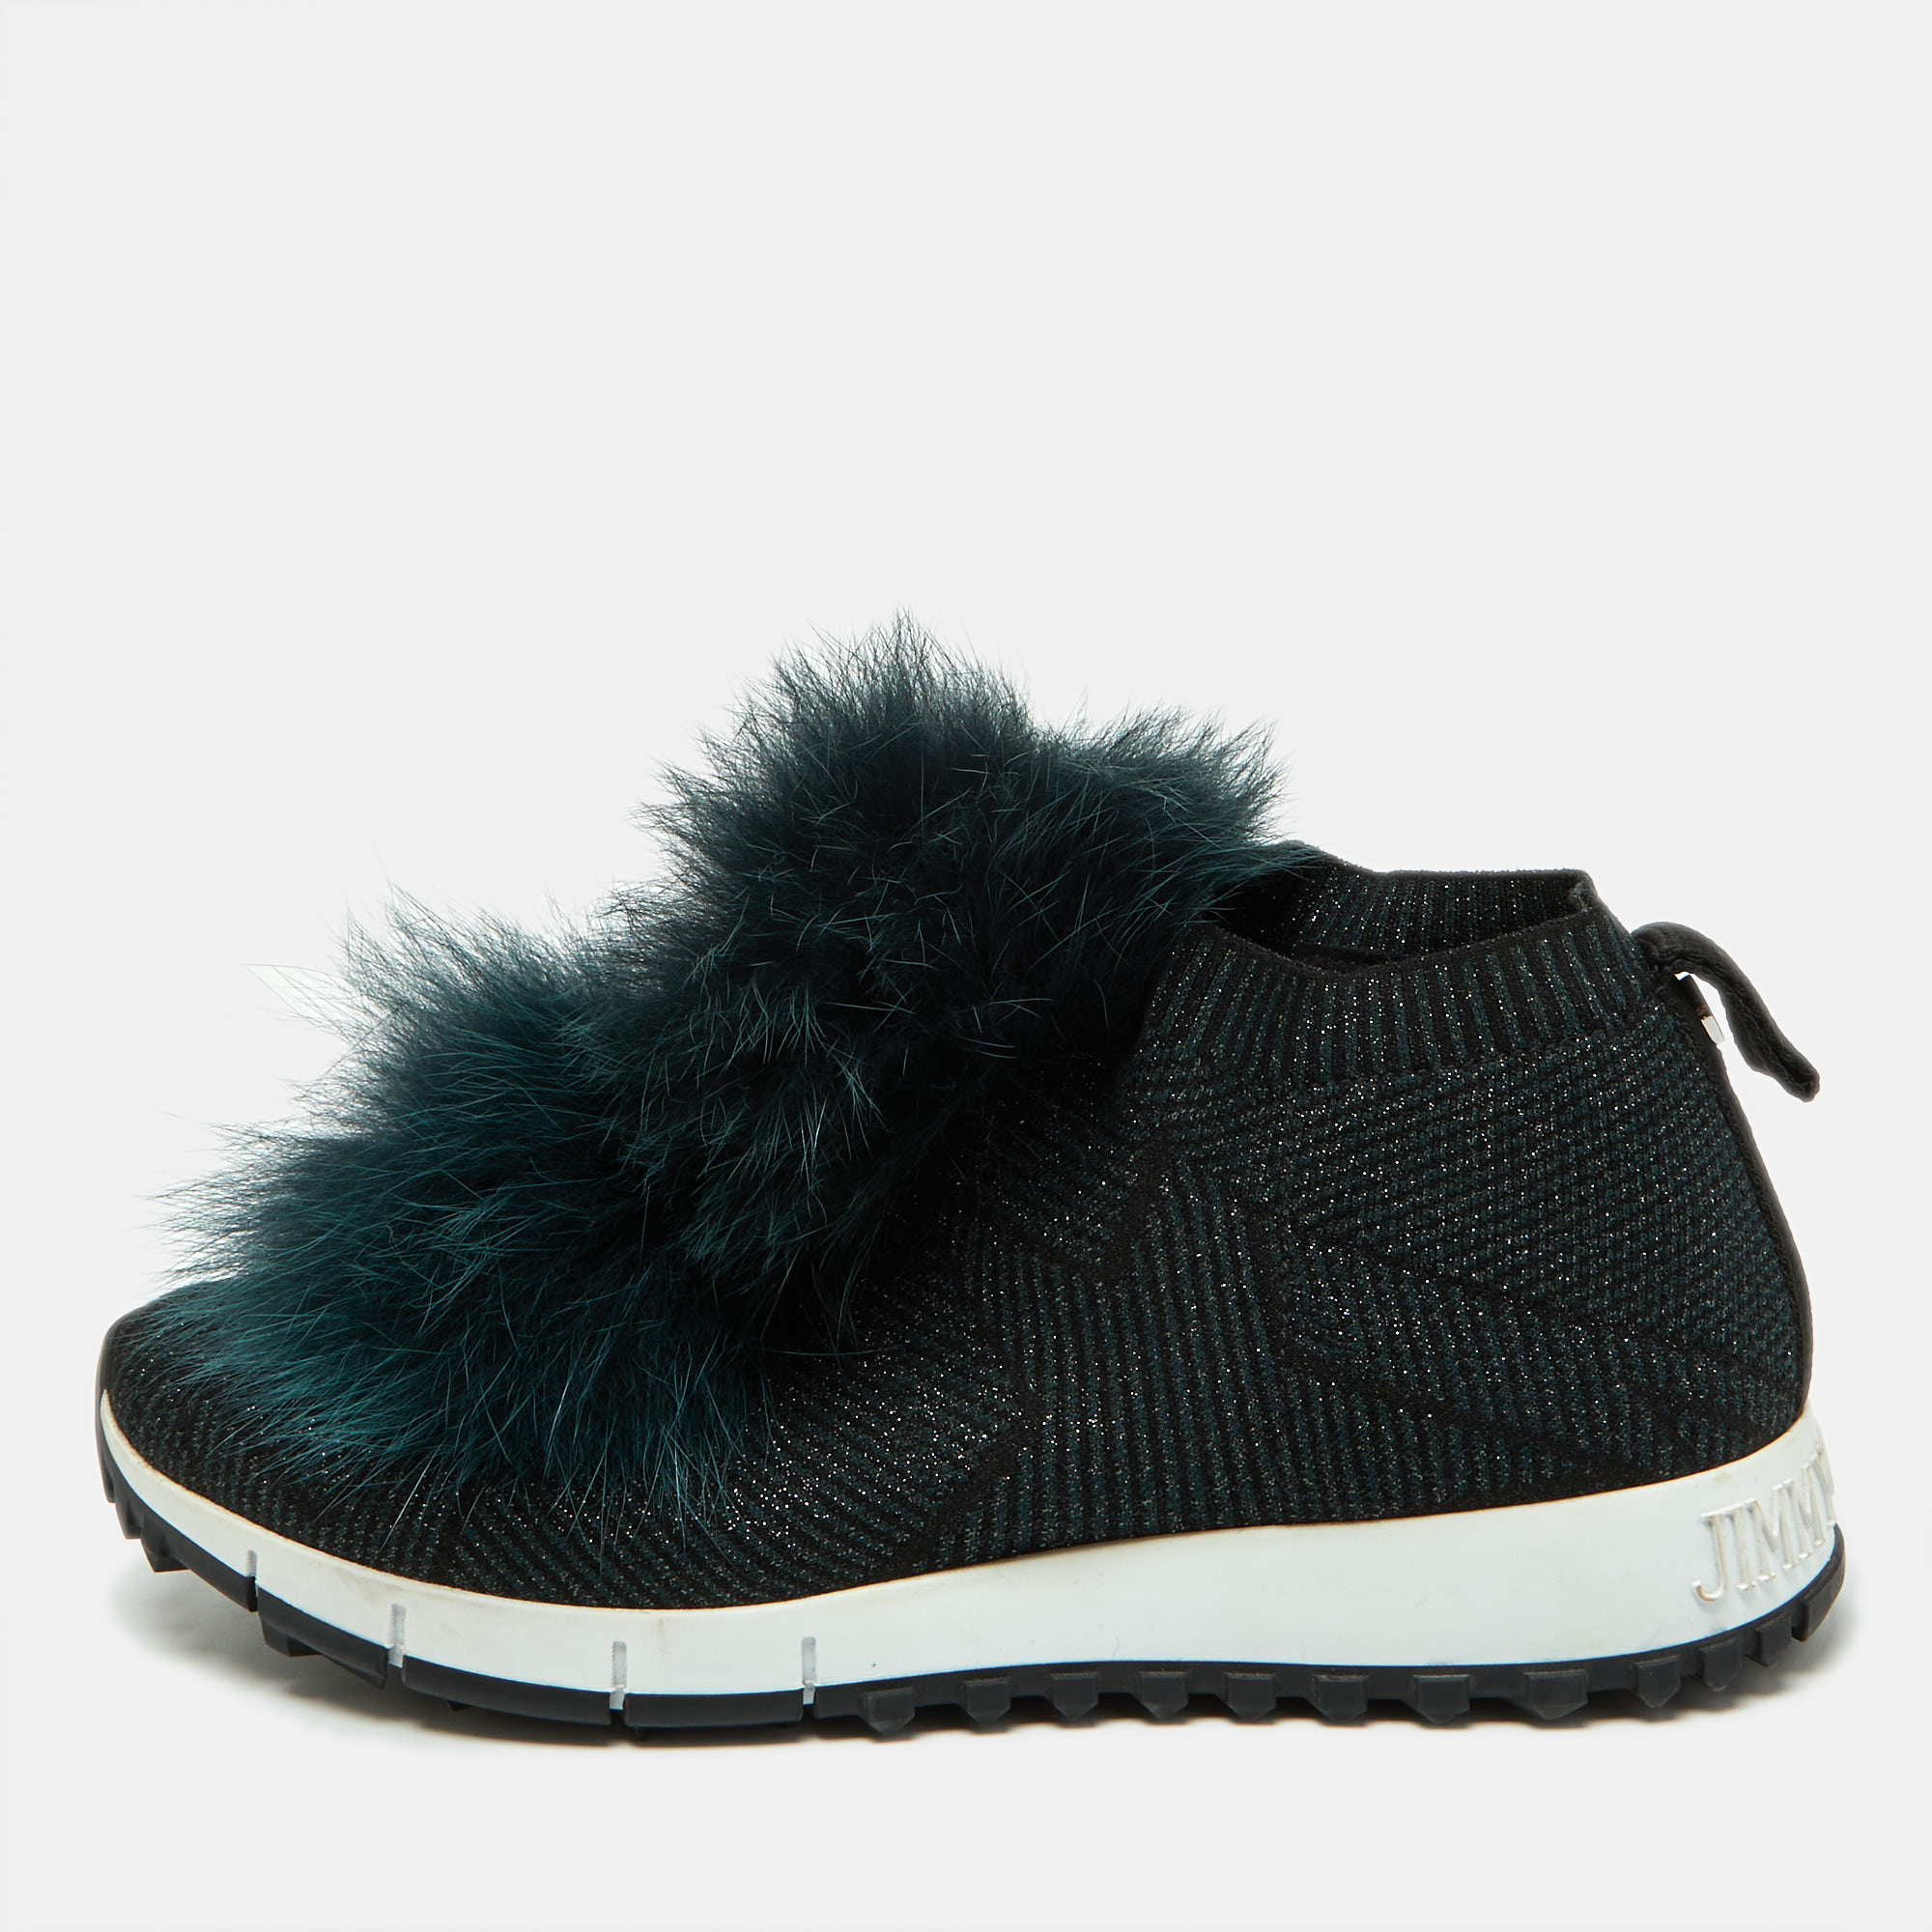 

Jimmy Choo Deep Green Knit Fabric and Fur Pom Pom Norway Slip On Sneakers Size